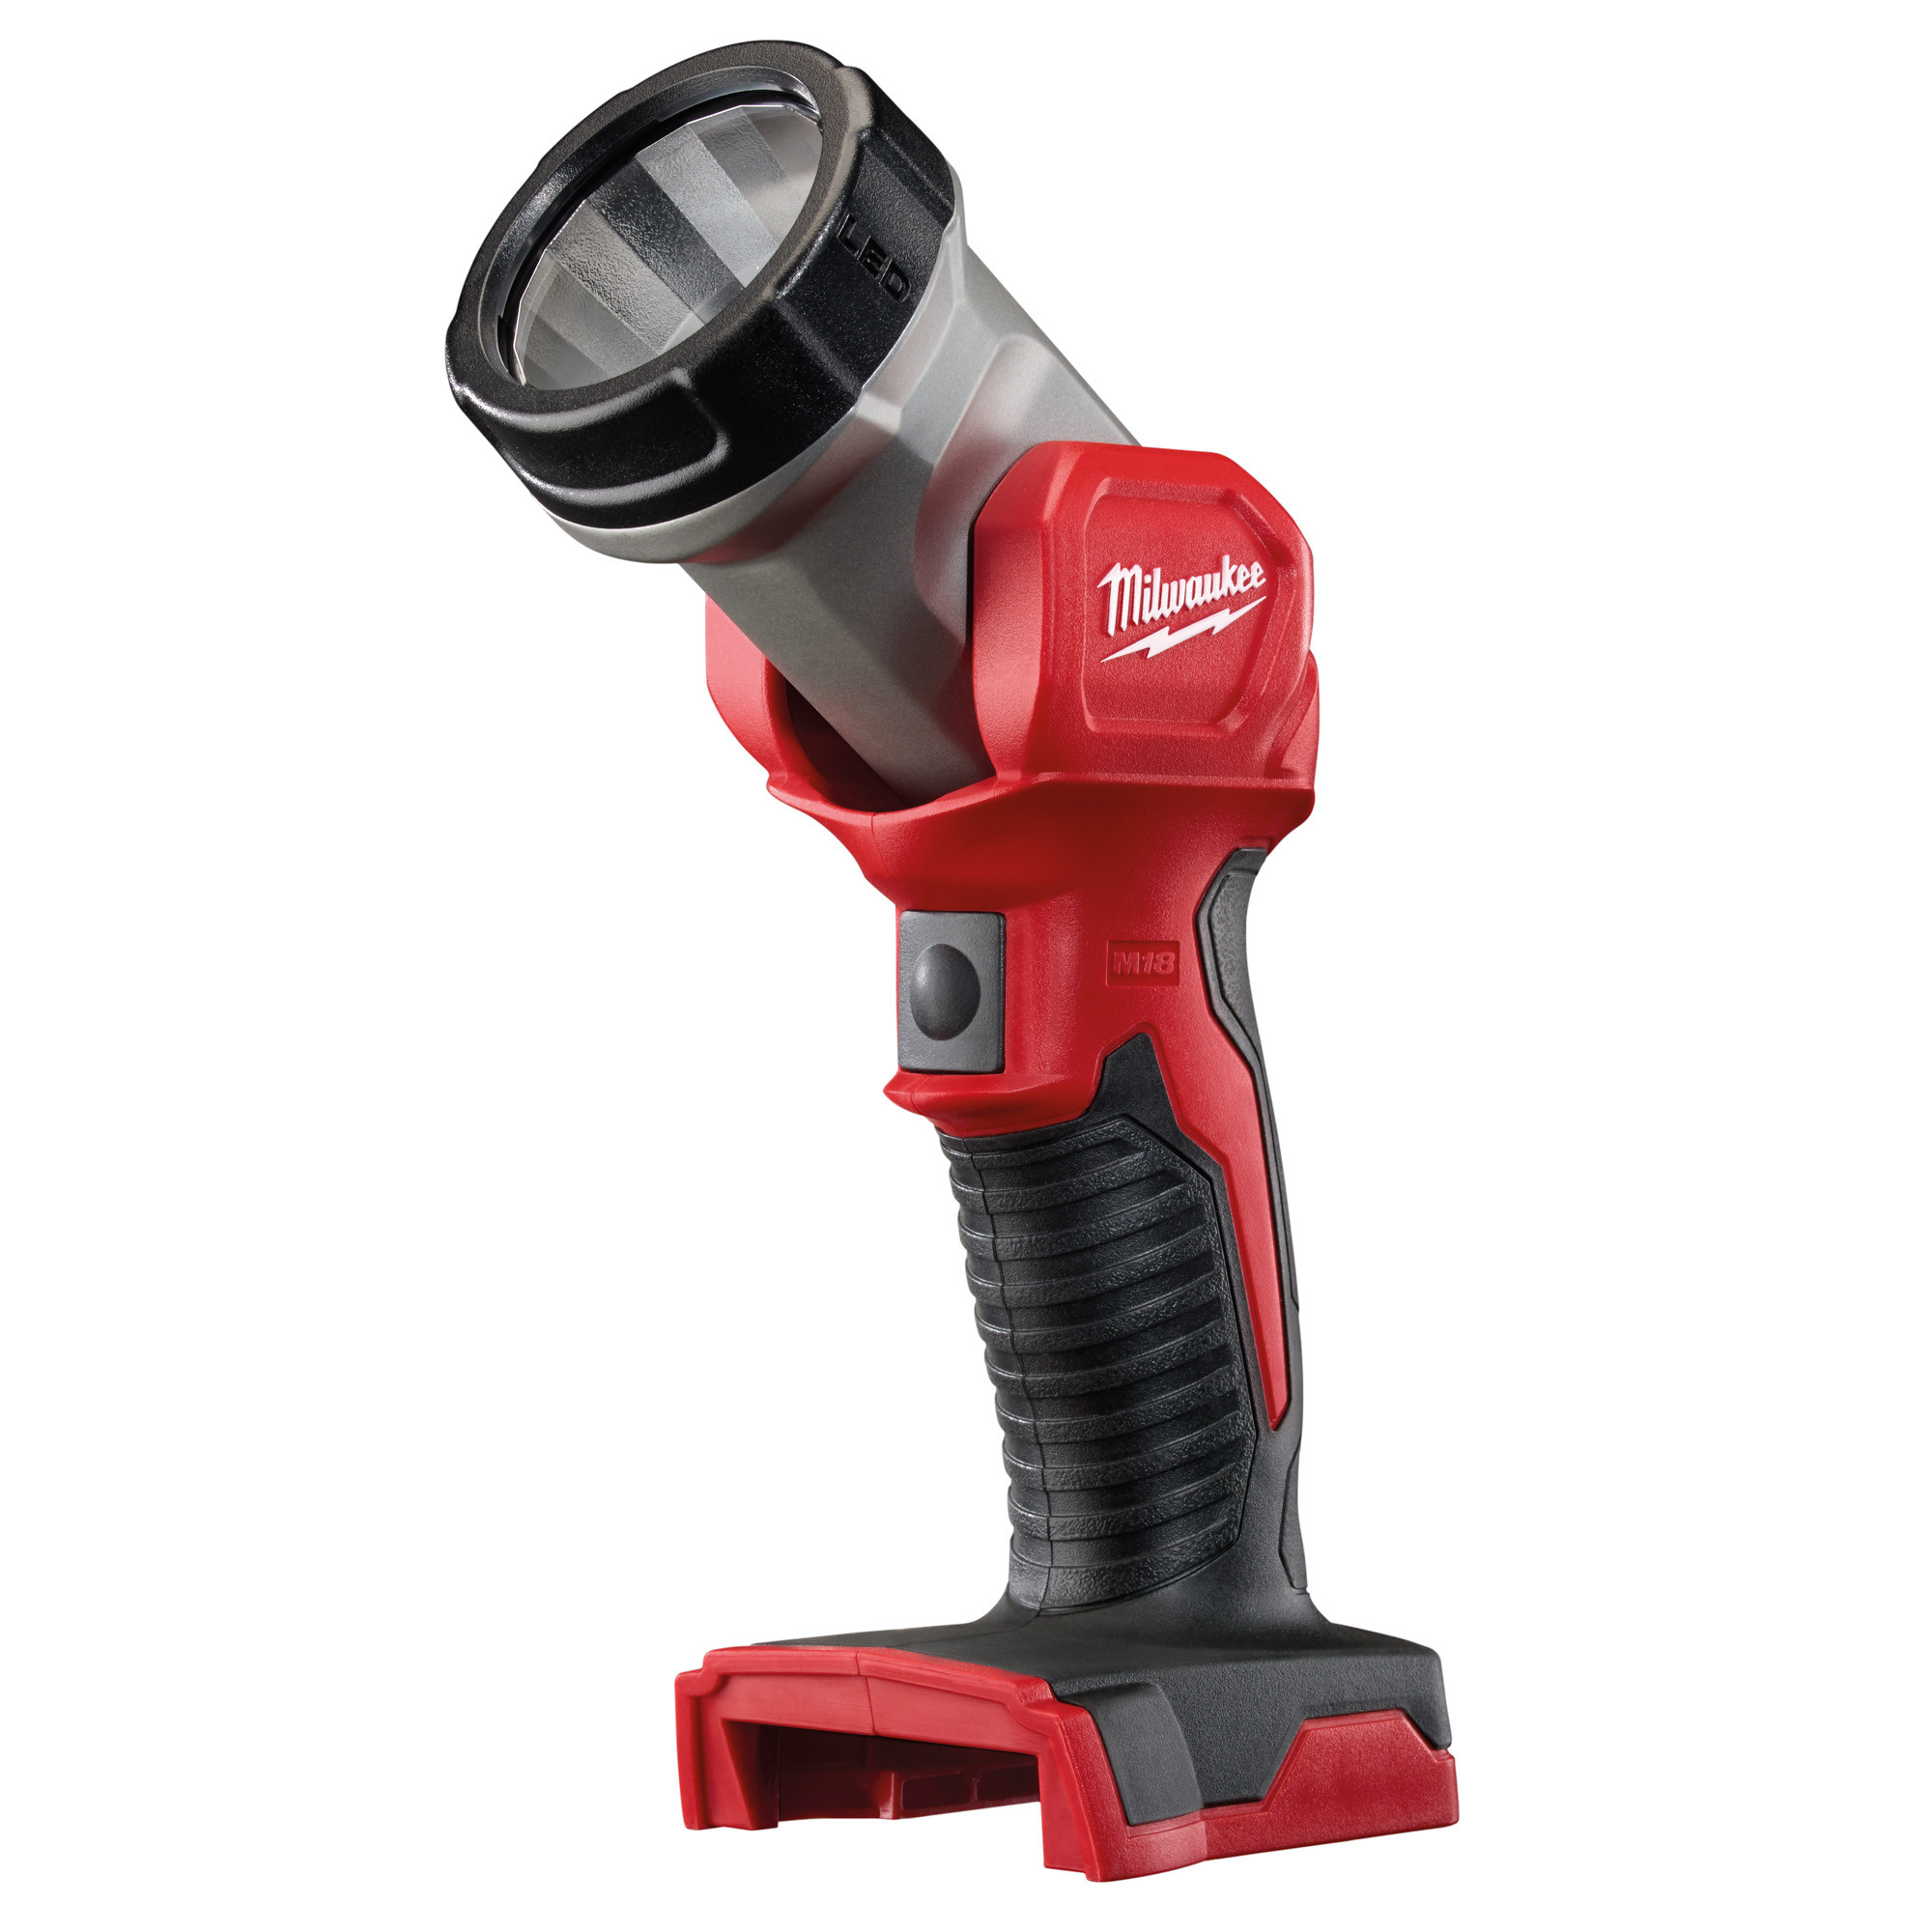 Milwaukee M18 LED Trueview Torch M18TLED-0 (Body Only)